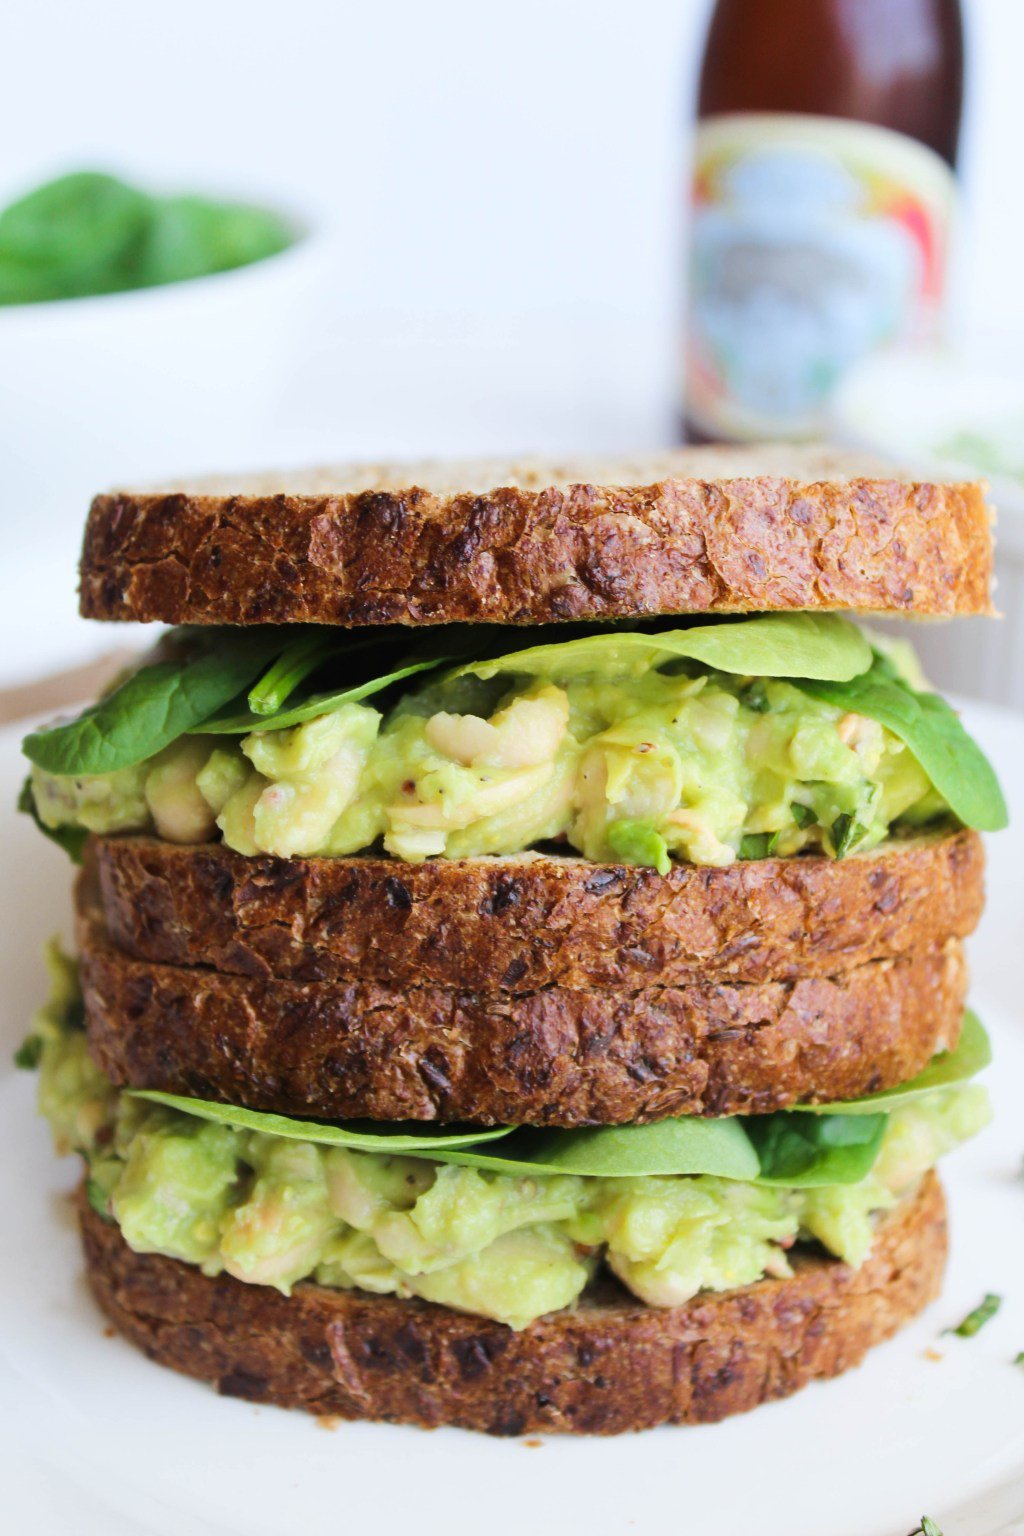 Healthy Lunch Recipes: Smashed White Bean, Basil, and Avocado Sandwich